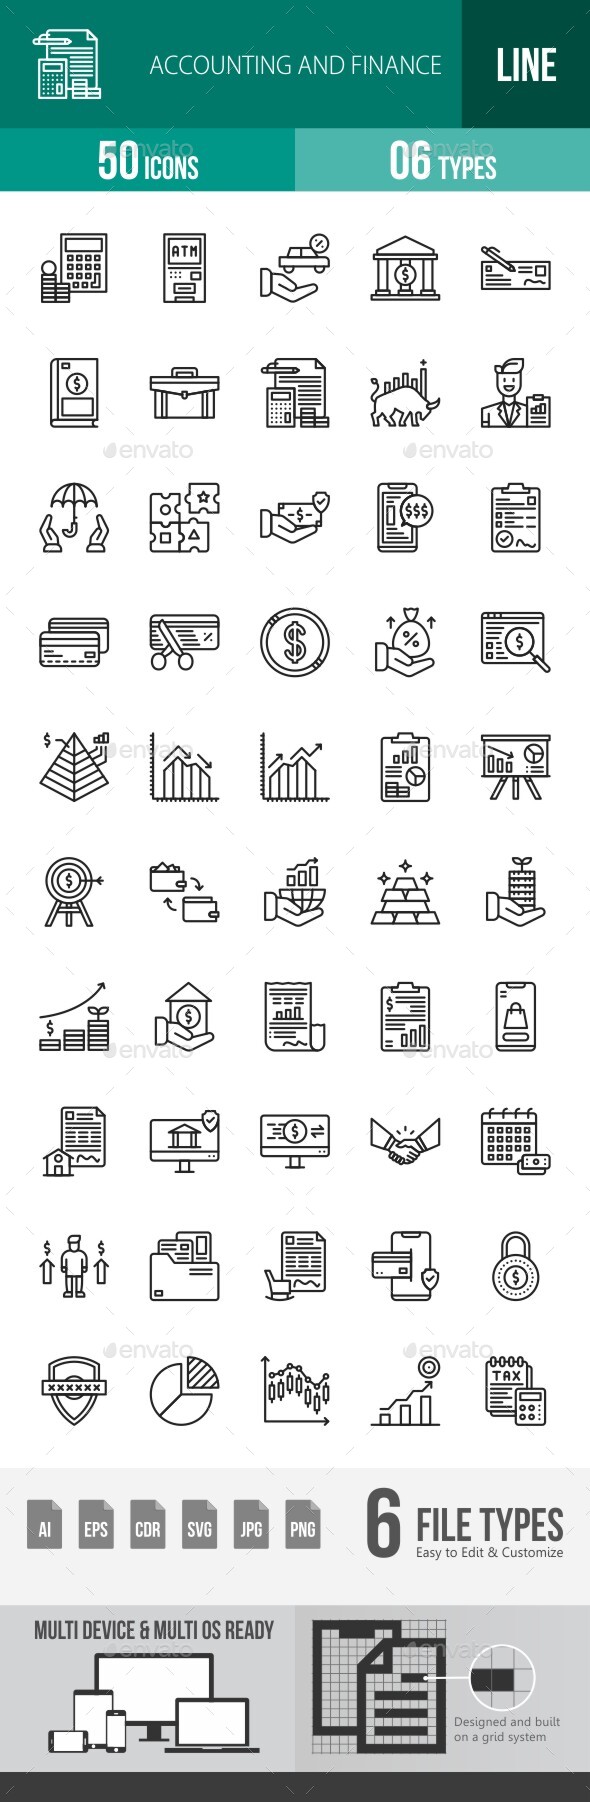 Accounting & Finance Line Icons